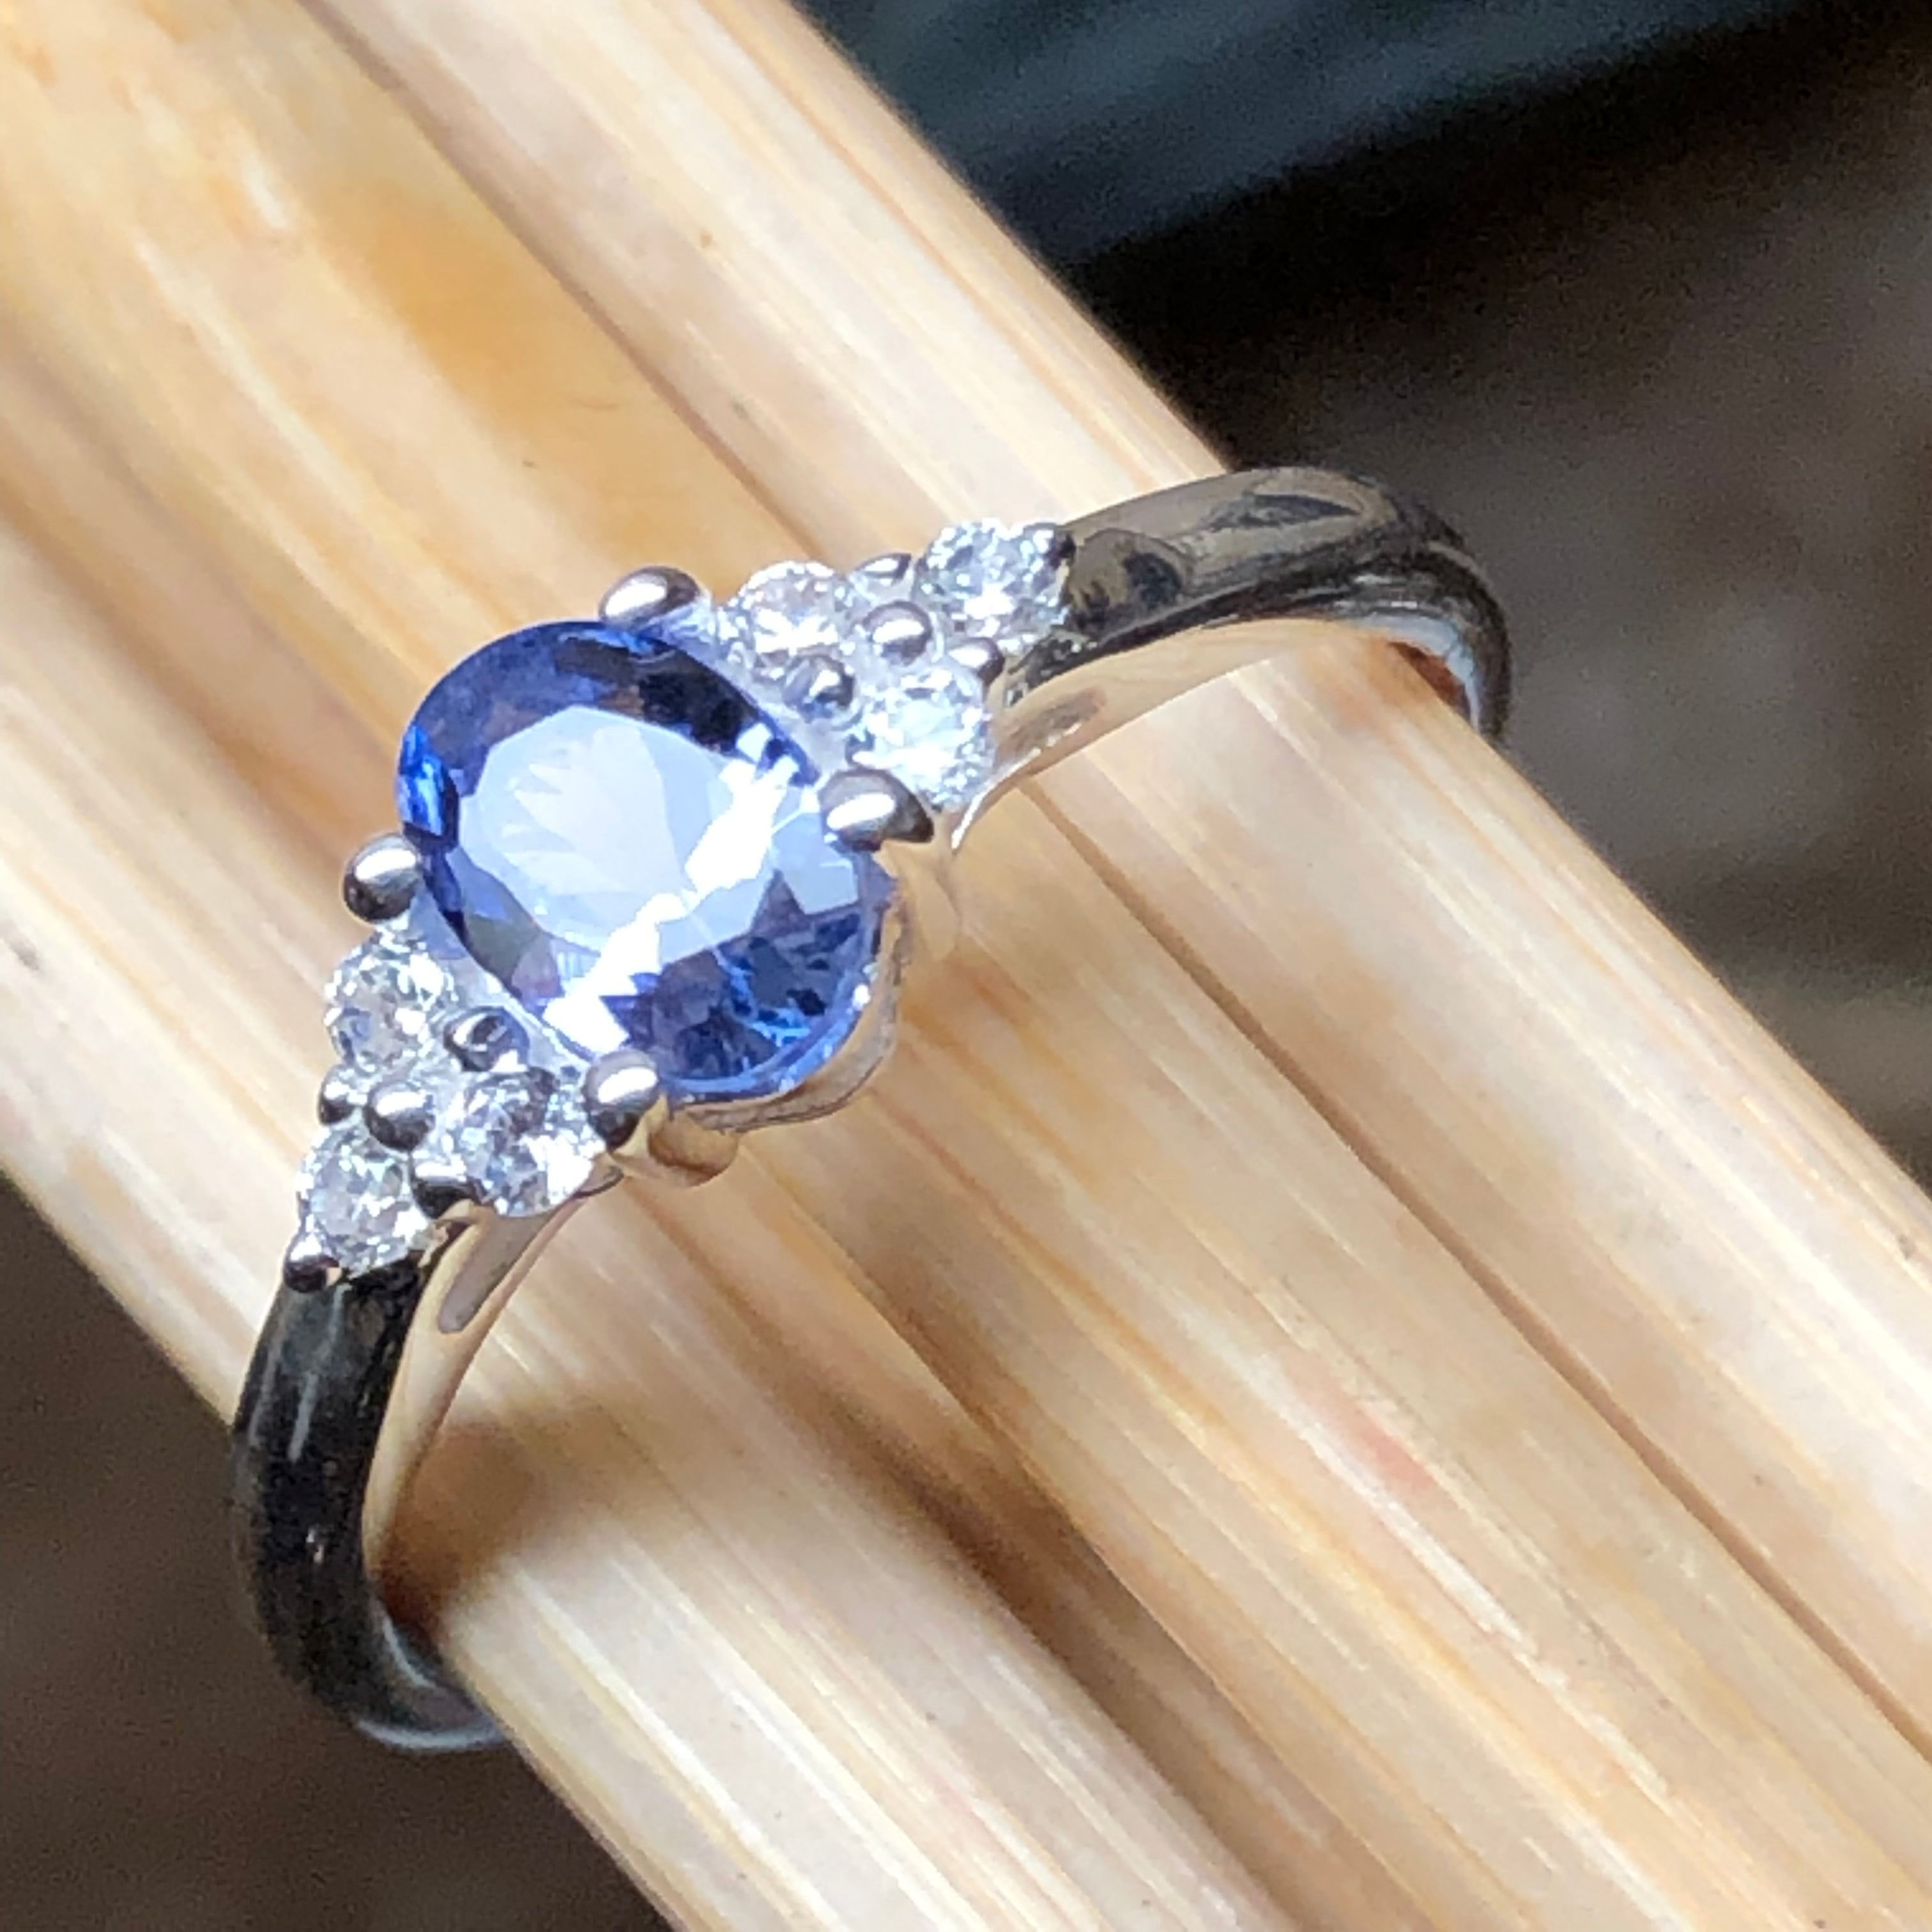 Genuine Blue Tanzanite 925 Solid Sterling Silver Engagement Ring Size 6, 7, 8, 9, 10 - Natural Rocks by Kala